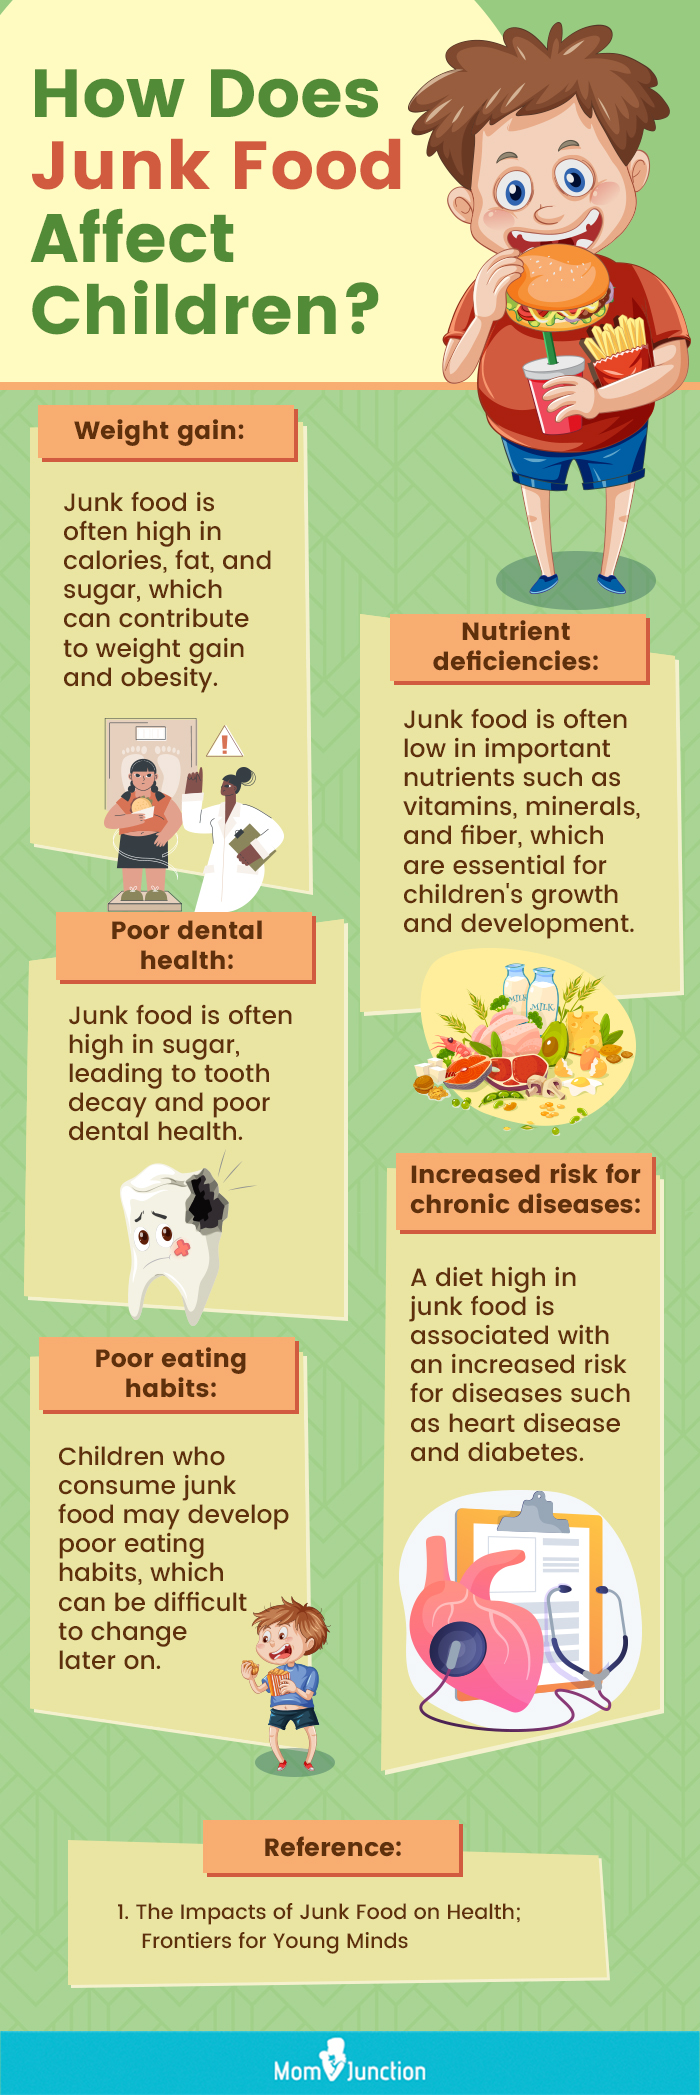 healthy and unhealthy foods for kids